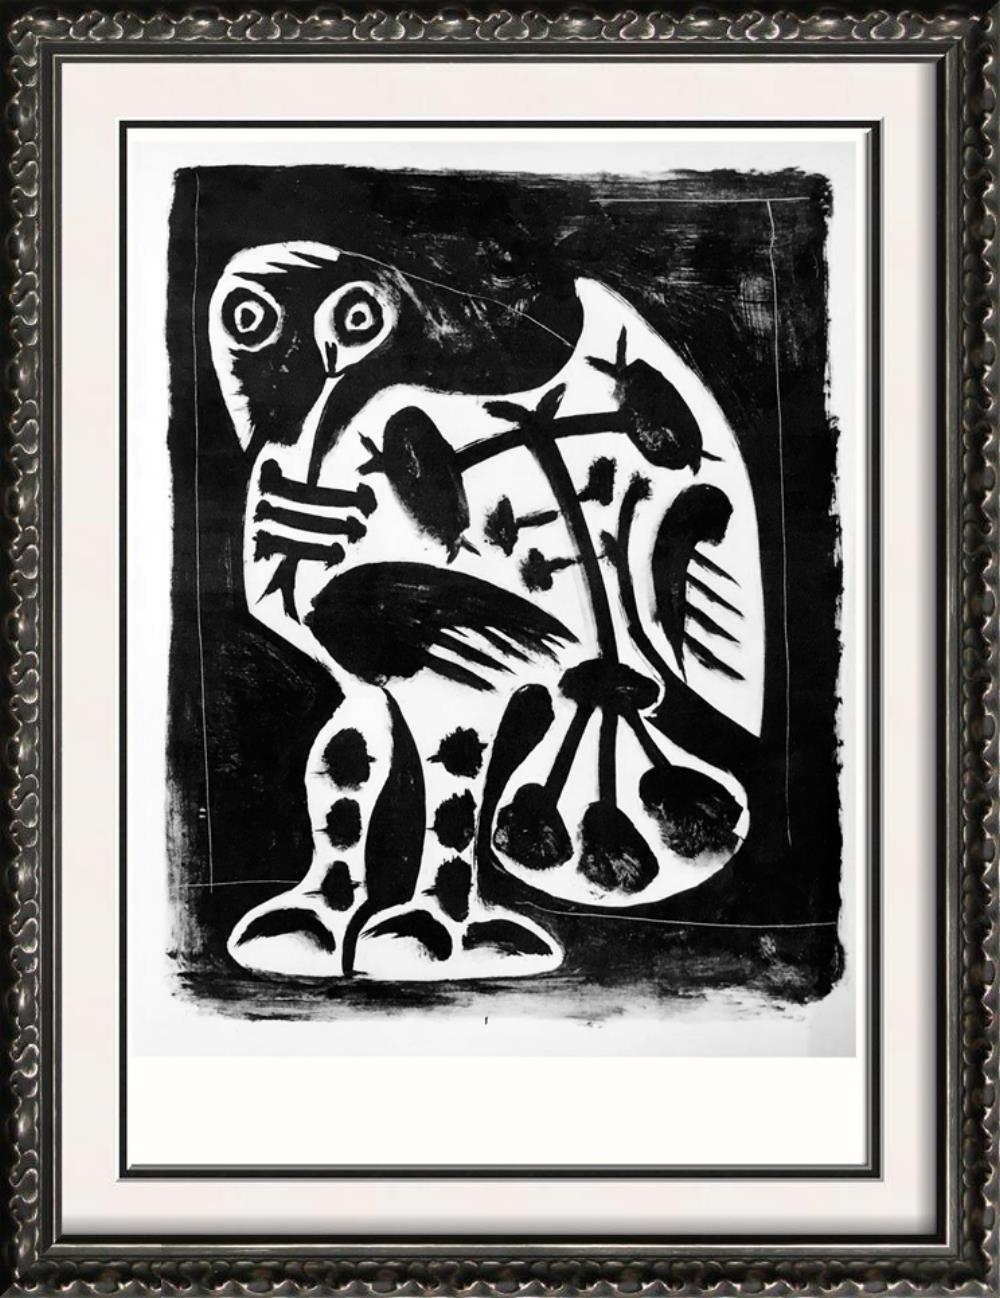 Pablo Picasso The Great Owl c. 1948 Fine Art Print from Museum Artist